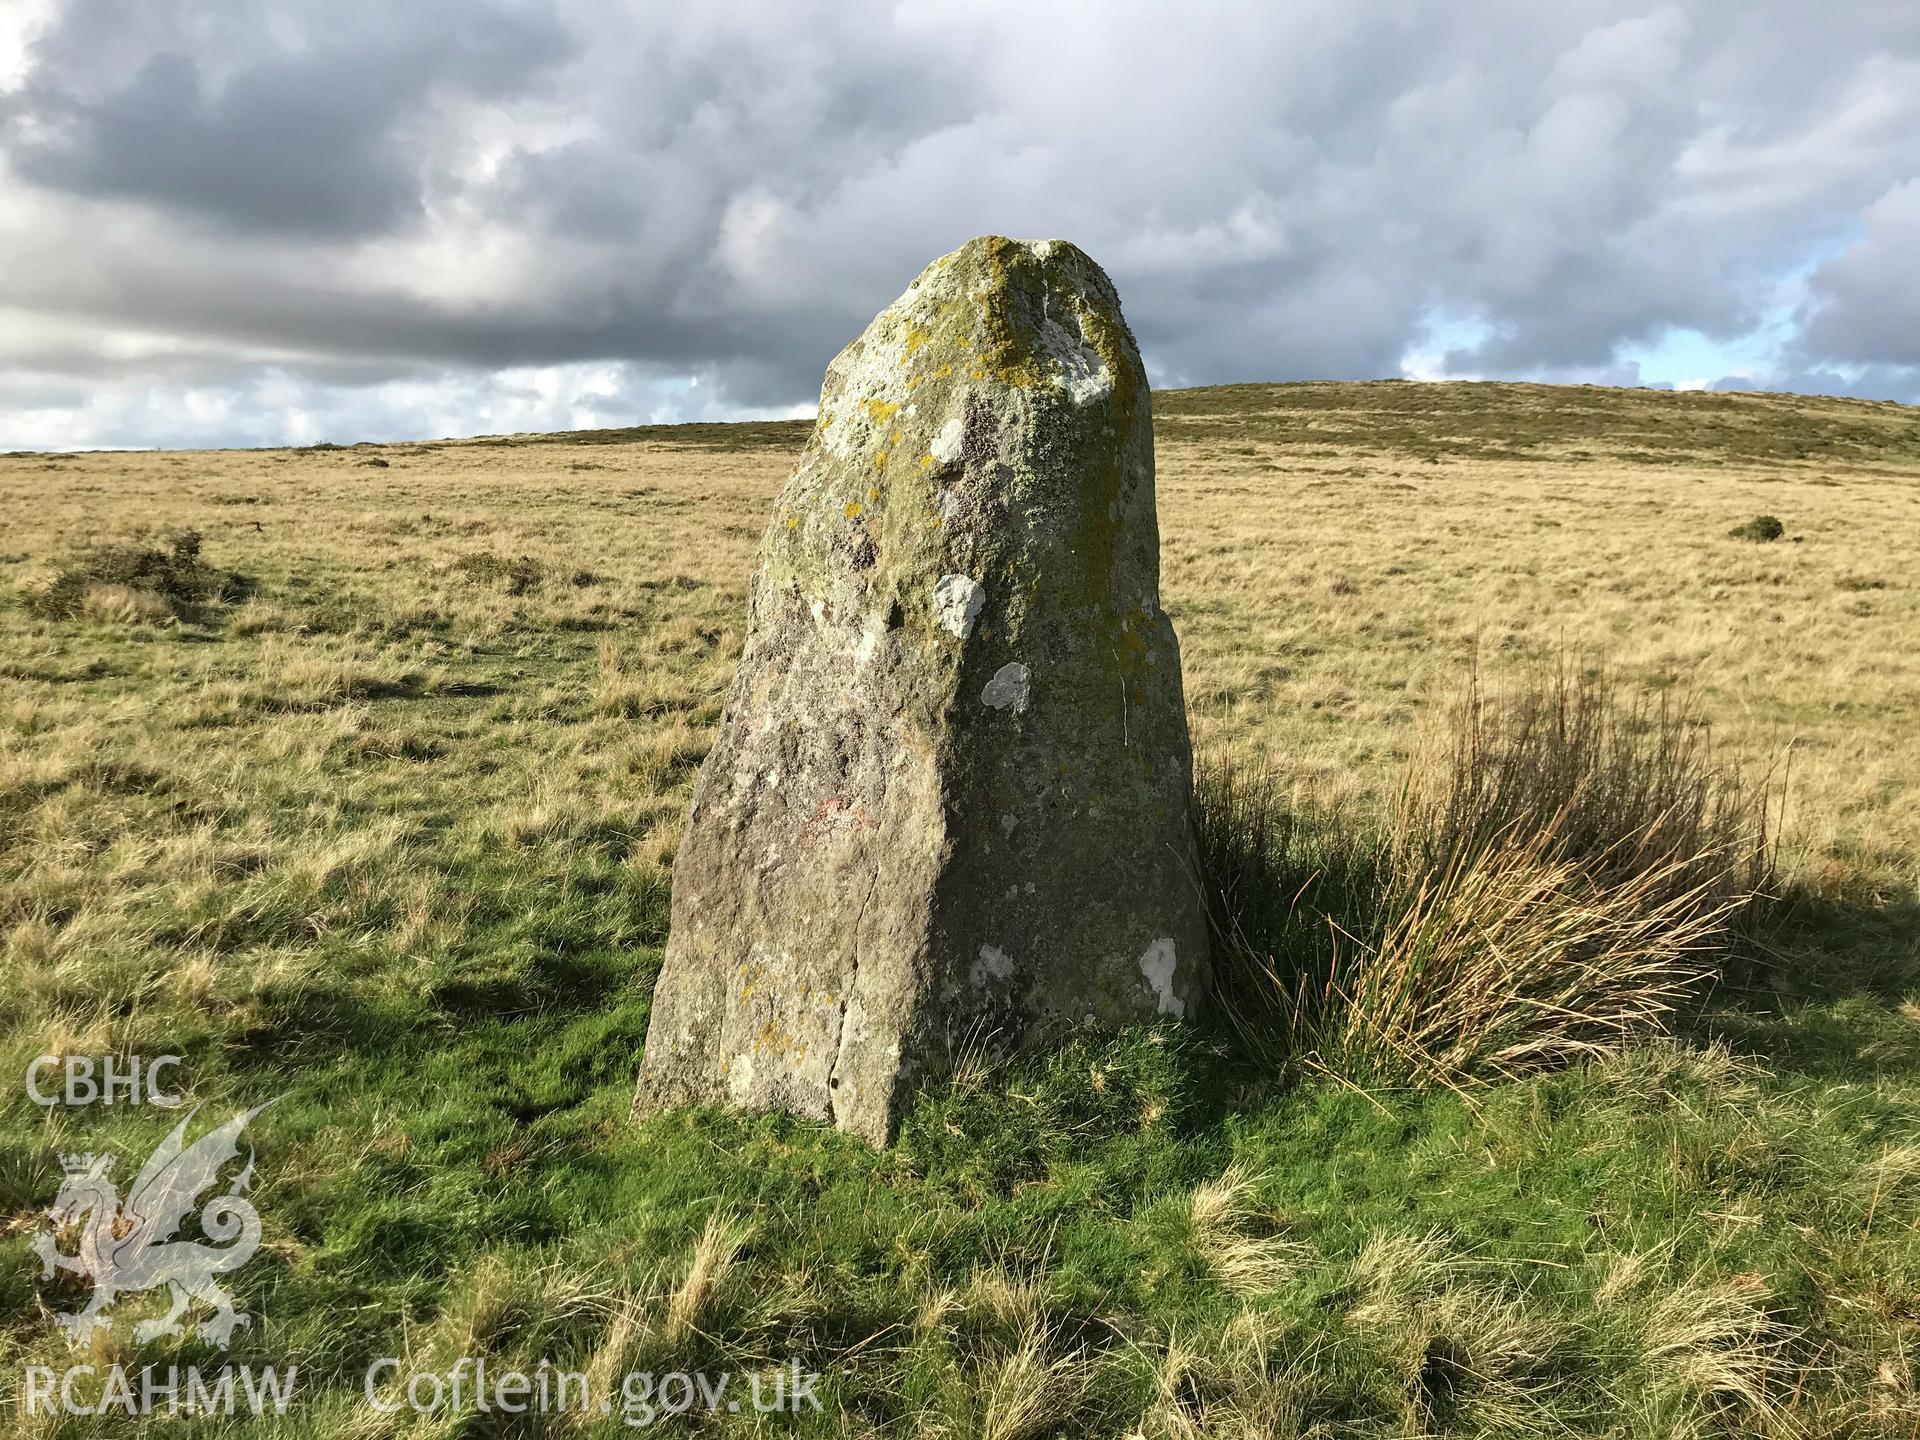 Digital colour photograph showing Waun Mawn standing stone (possible stone circle), Eglwyswrw, taken by Paul Davis on 22nd October 2019.